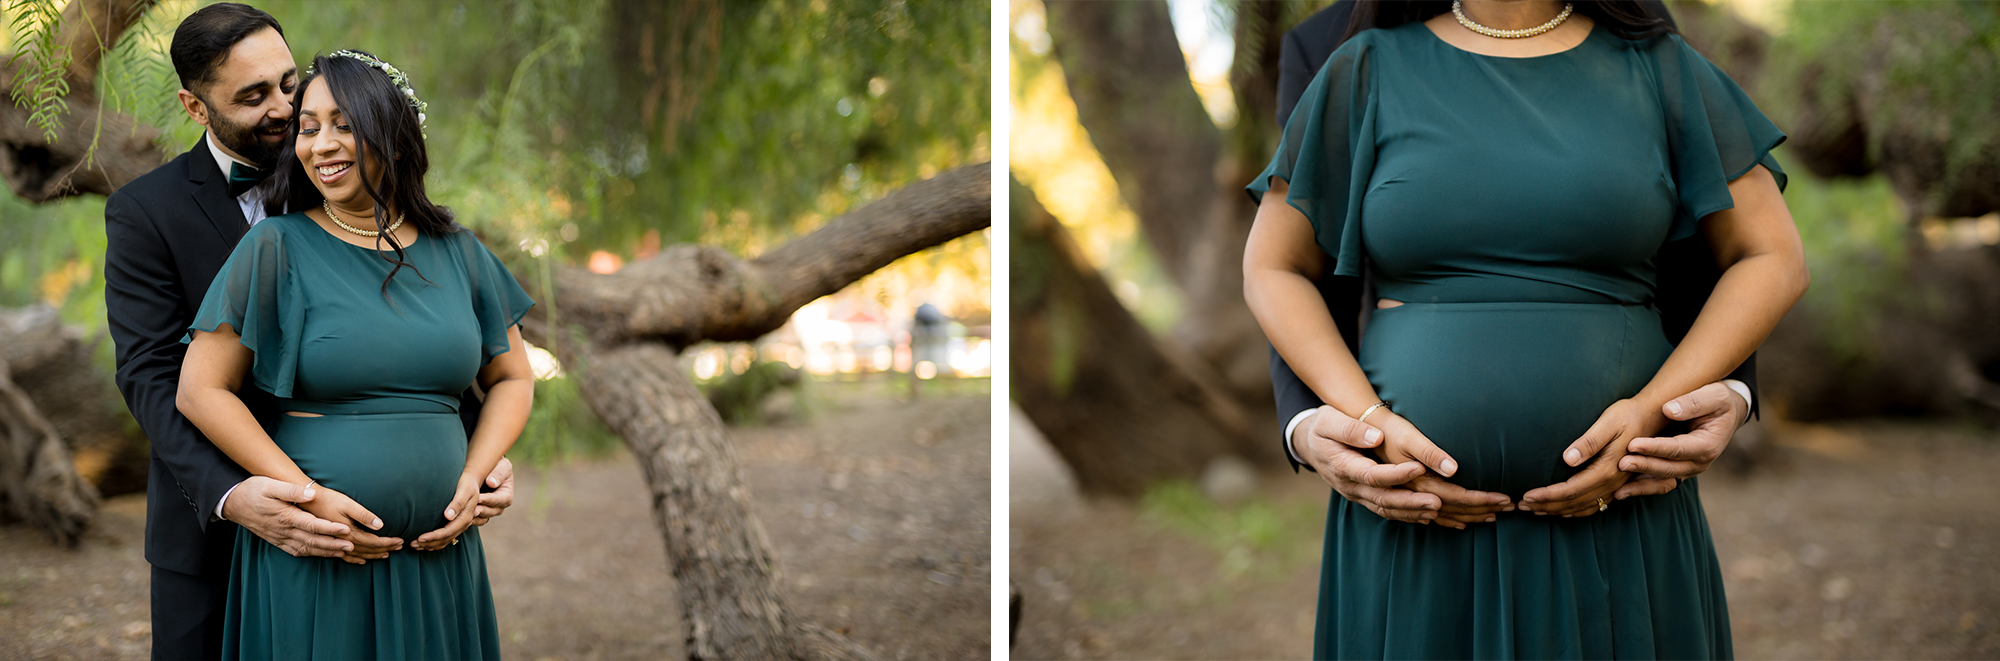 4-RS-Irvine-Regional-Park-Maternity-Photos-Andrew-Kwak-Photography.png